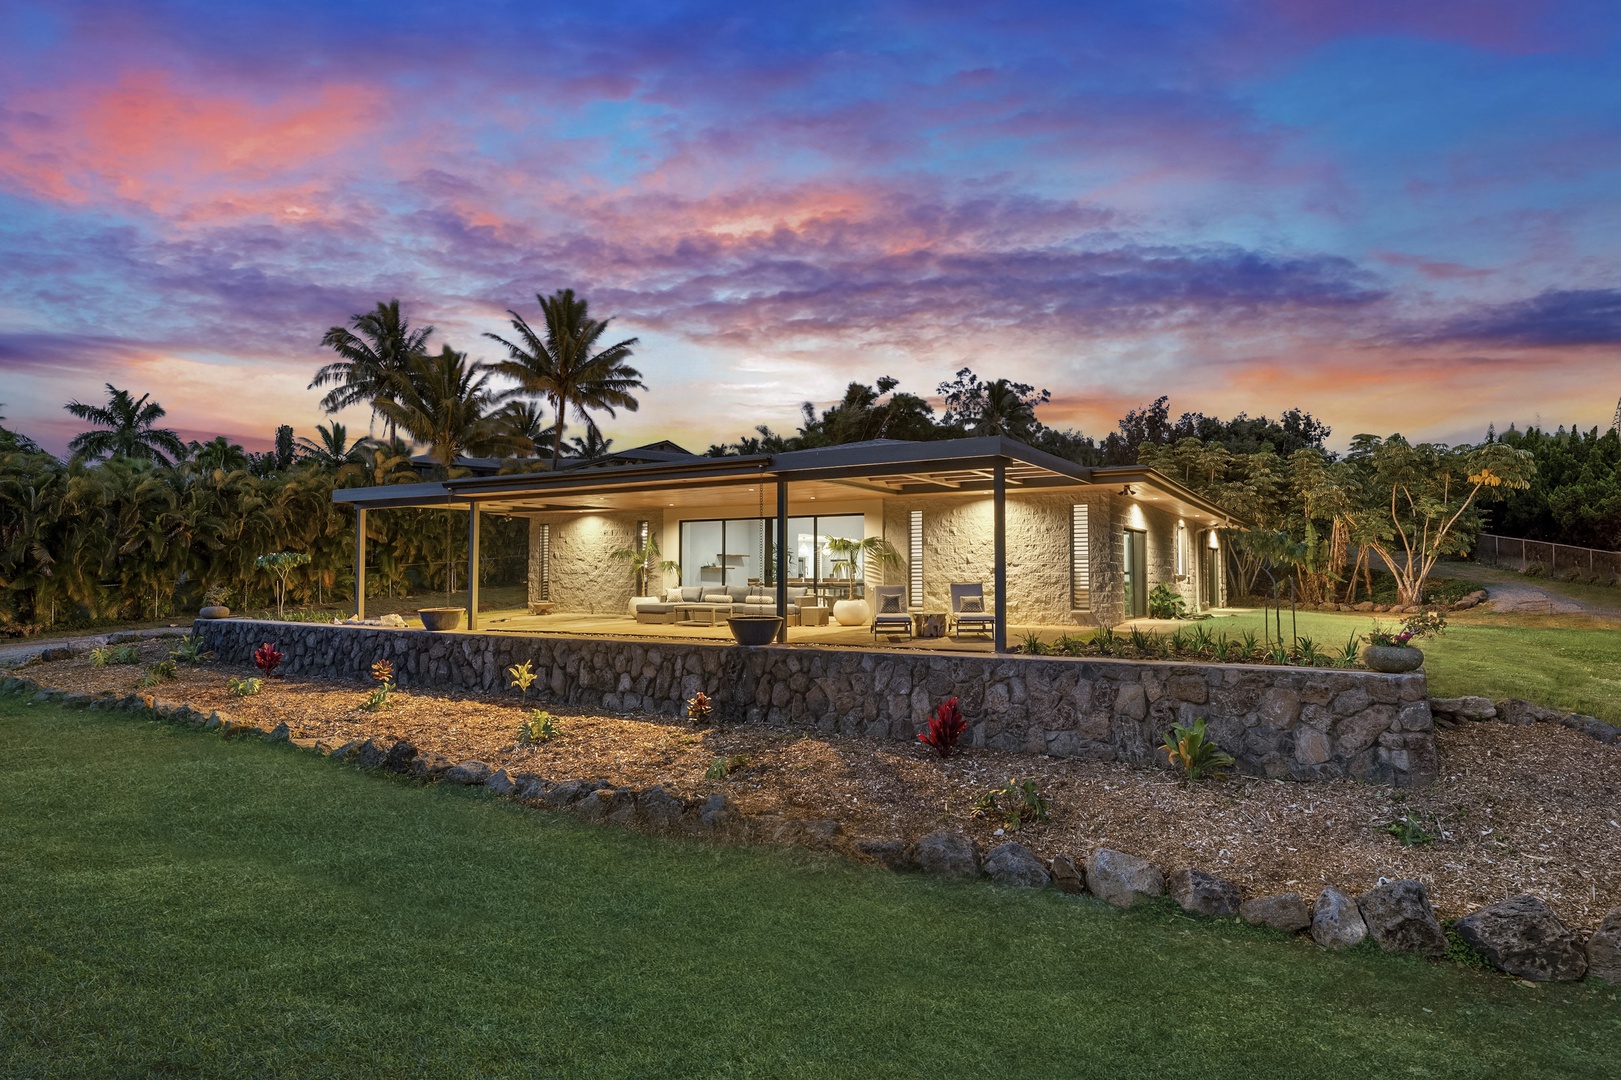 Haleiwa Vacation Rentals, Hale Mahina - Afternoon view of the front of the house